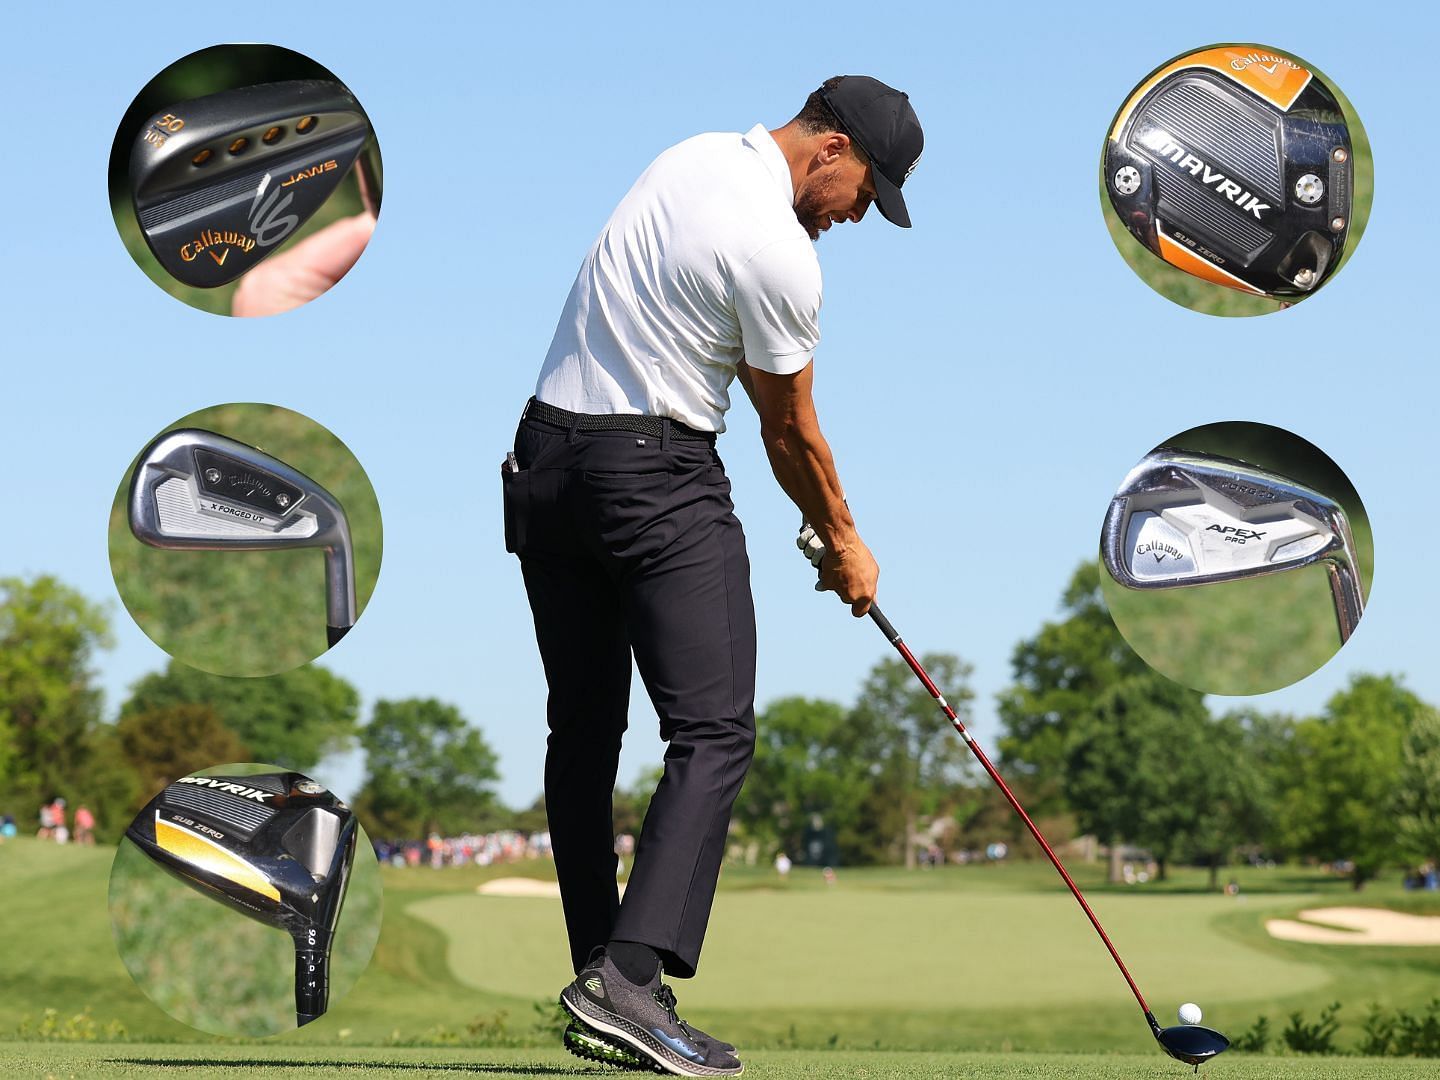 Which golf clubs does Steph Curry use? Finding out more